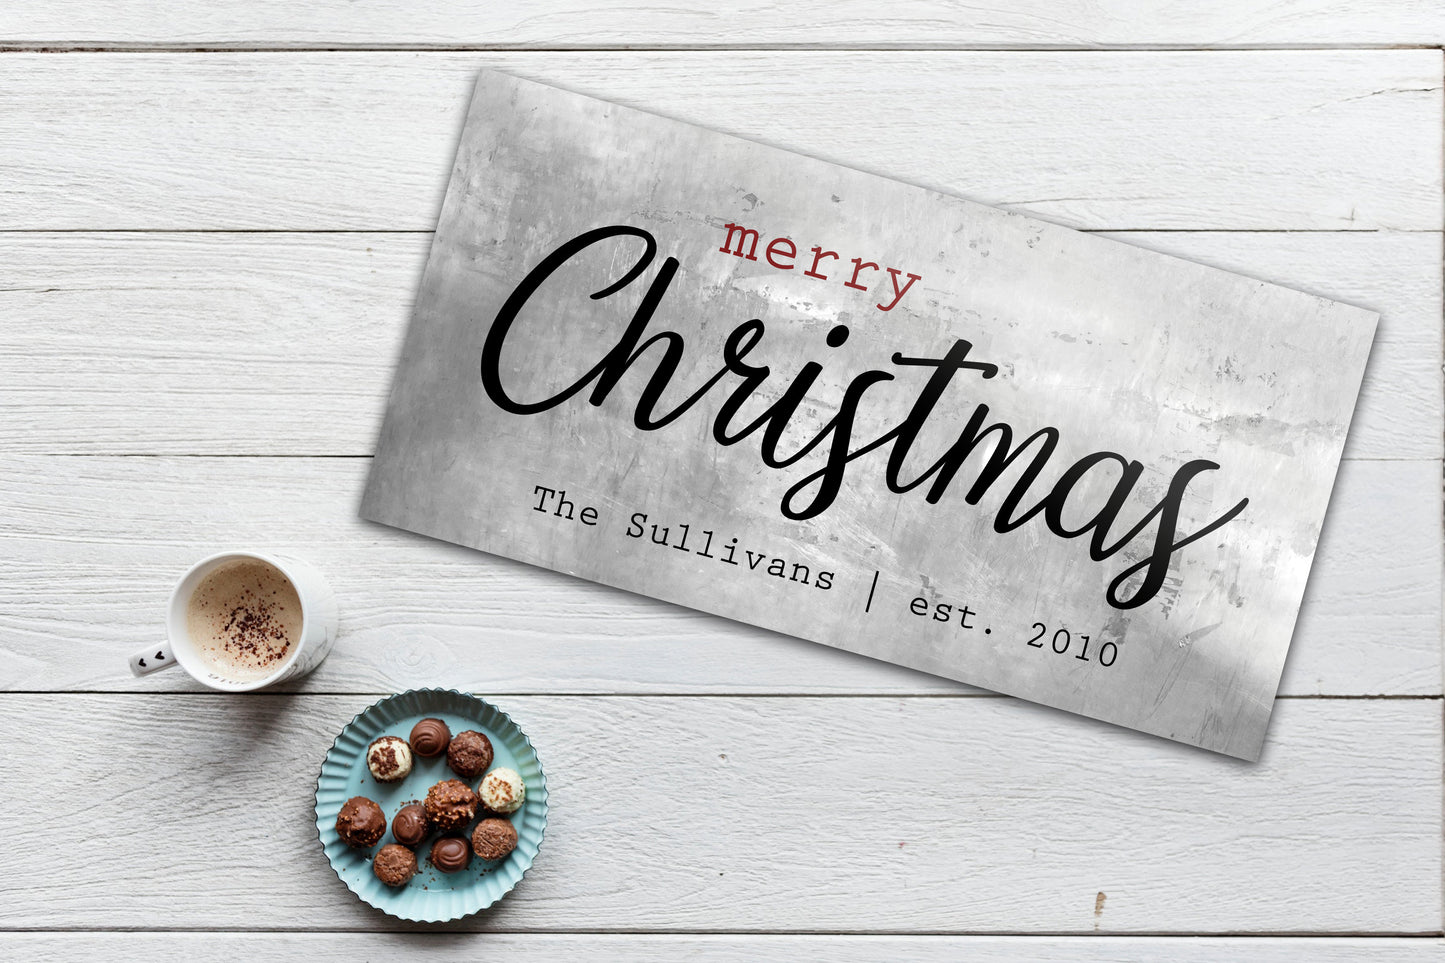 
                  
                    Rustic Holiday Sign, Christmas Sign, Christmas wall, Personalized Holiday Sign, Establsihed Sign, Family Sign, Name Sign, Christmas decor
                  
                